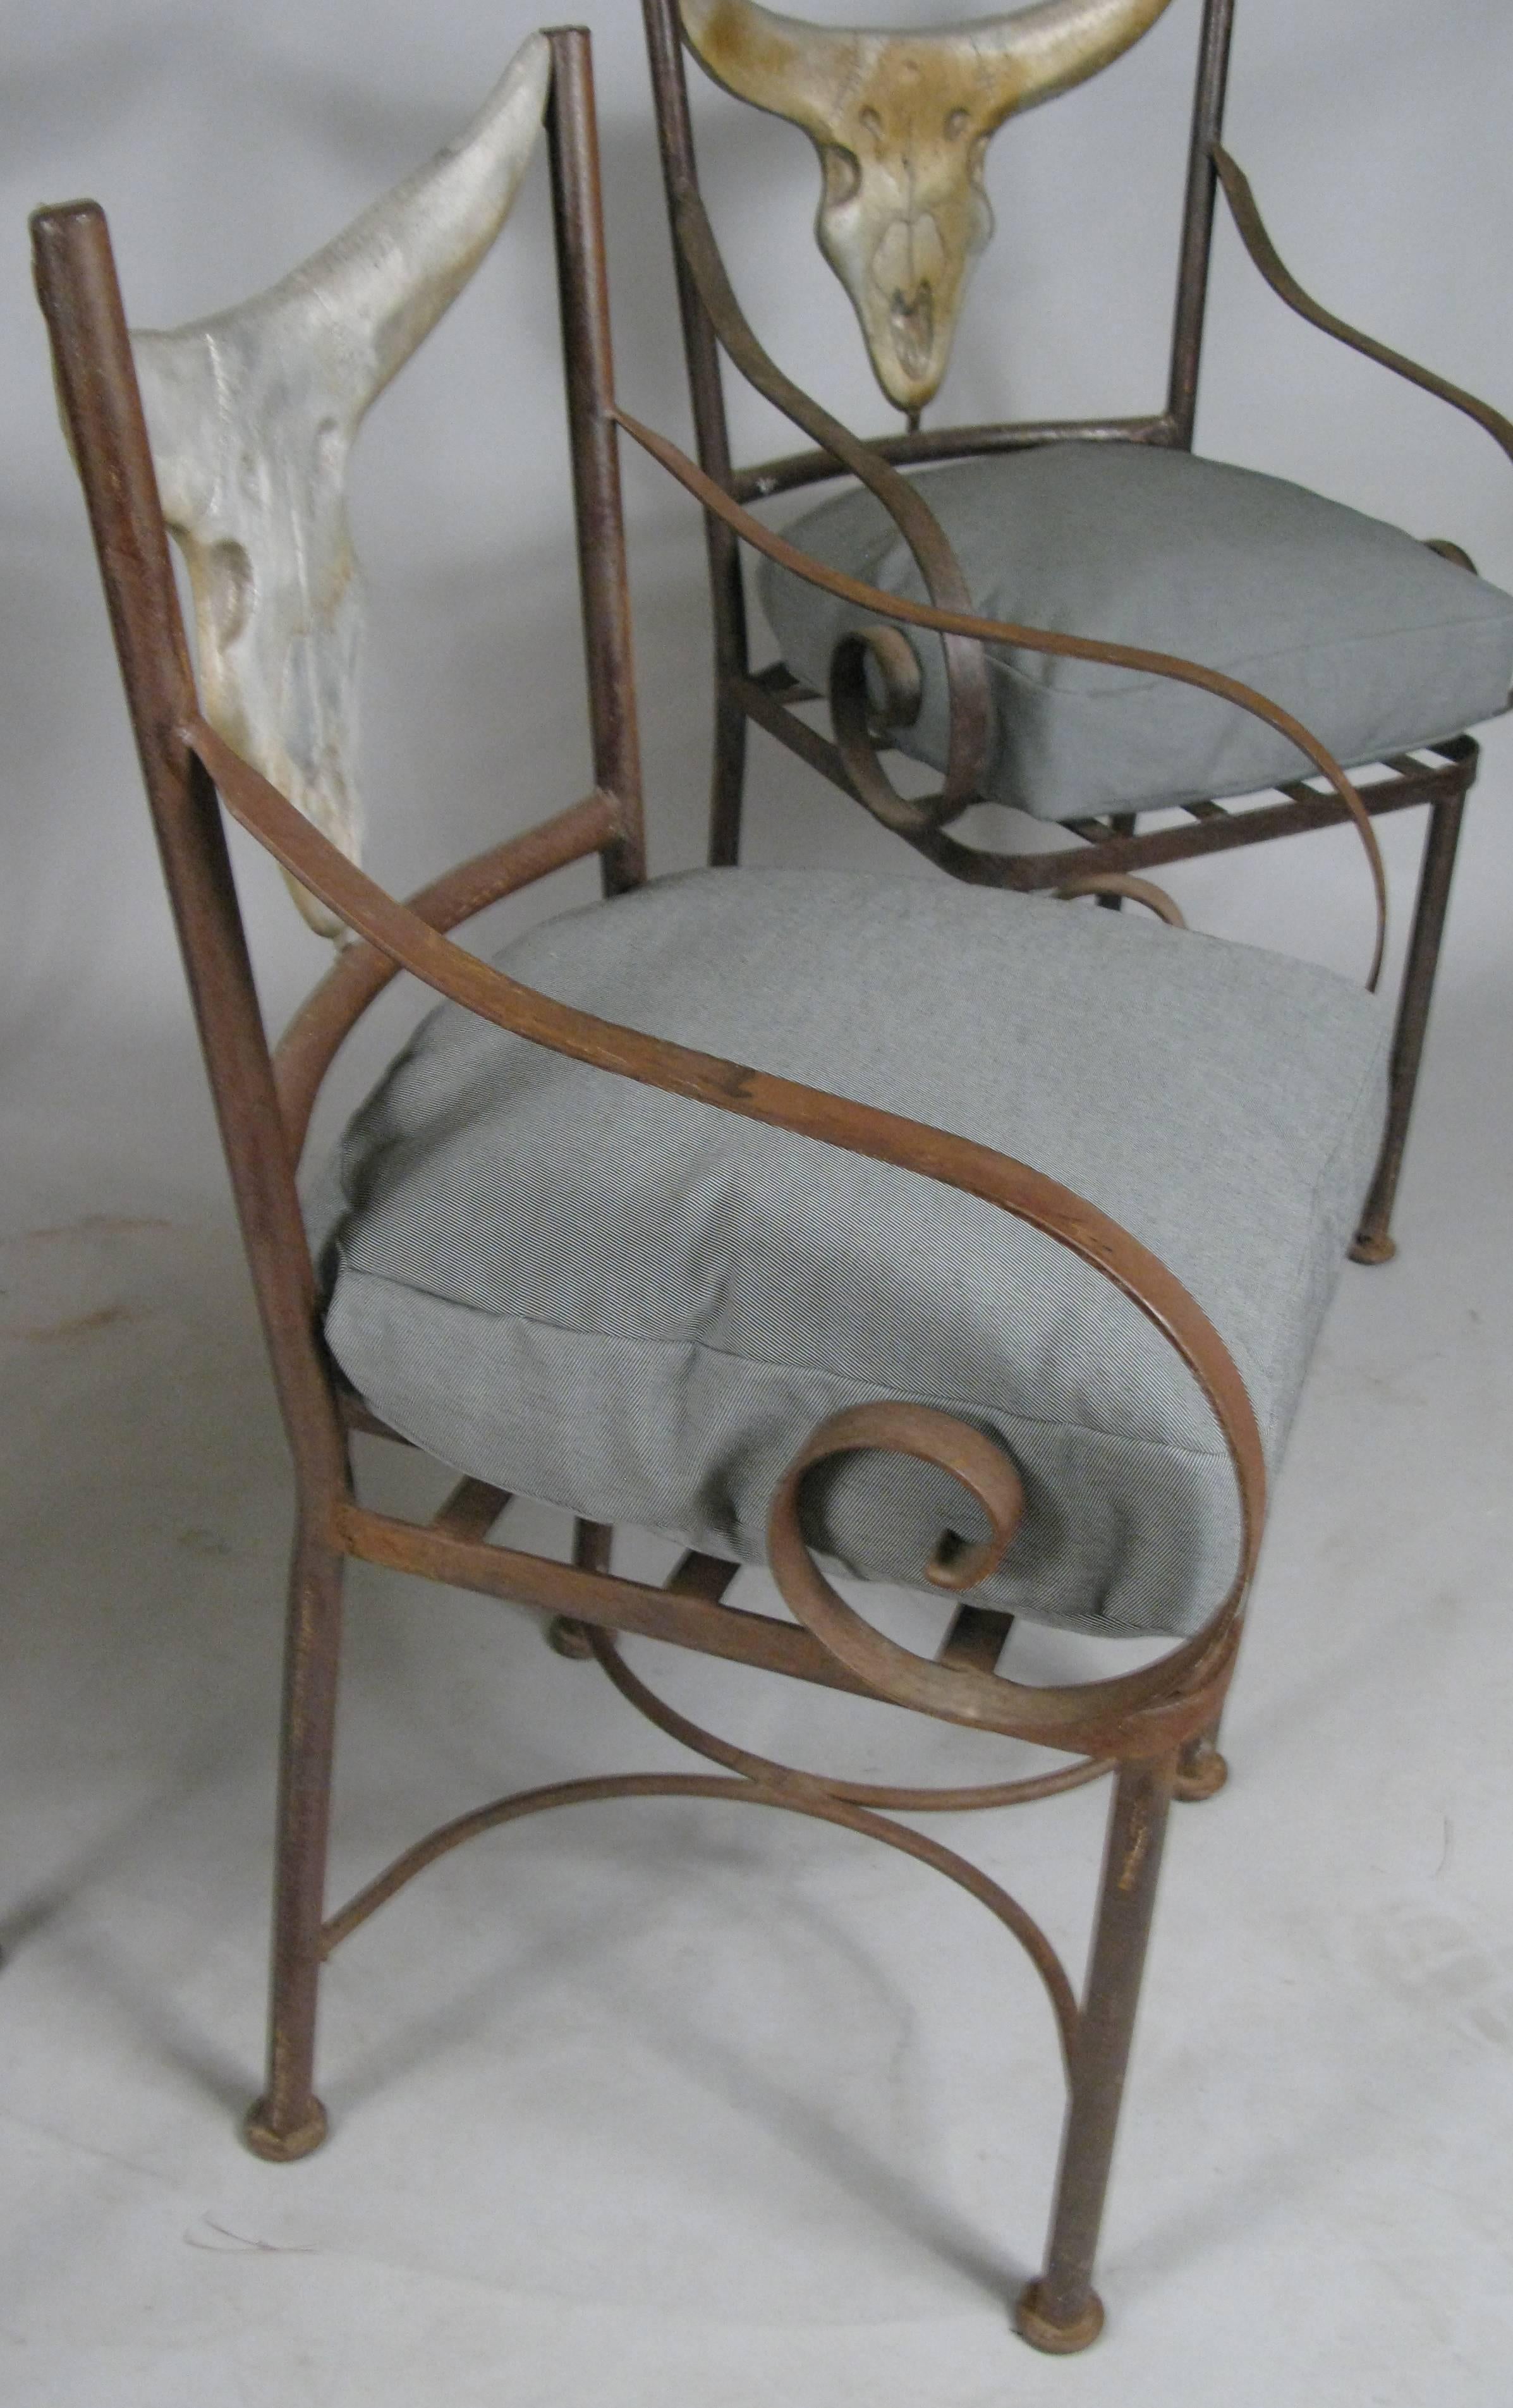 A very handsome set of four iron chairs with scroll arms and back in the cast form of a steer head. Very well made and unique. With new seat cushions in grey all weather fabric.